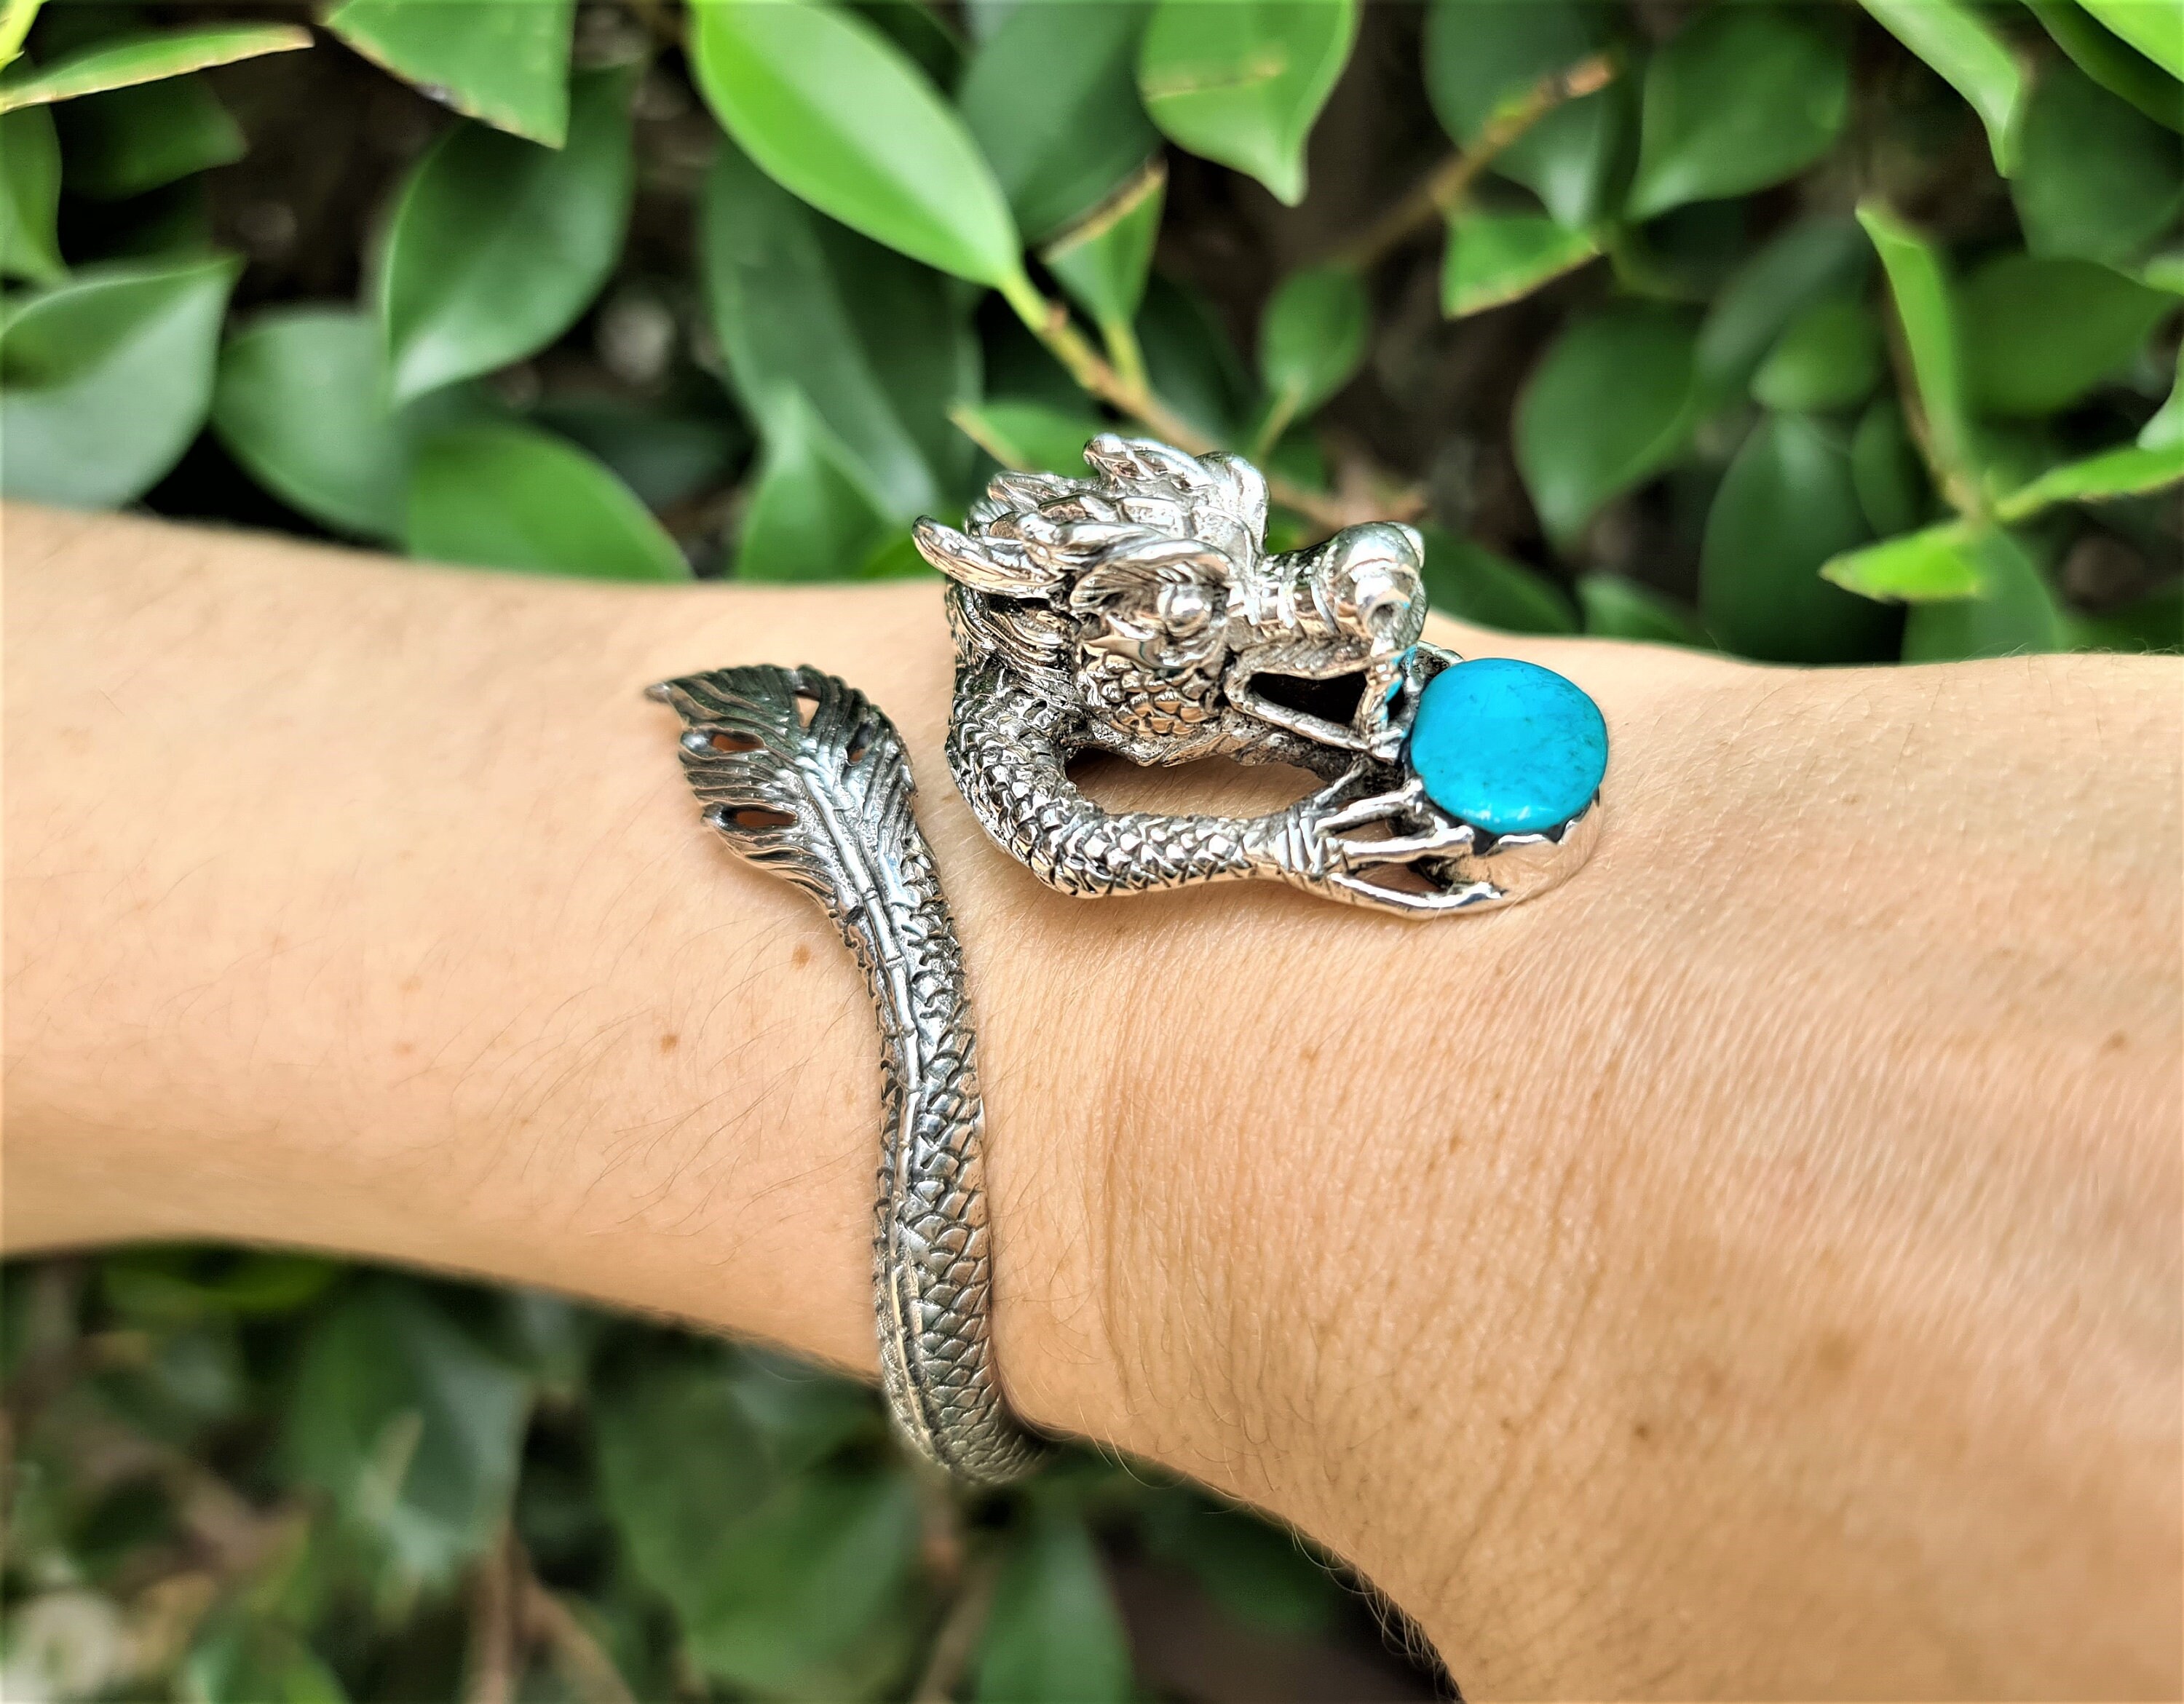 Reserved Dragon Bracelet STERLING SILVER 925 Turquoise Chinese Dragon  Ancient Sacred Symbol Talisman Amulet Good Luck Adjustable 